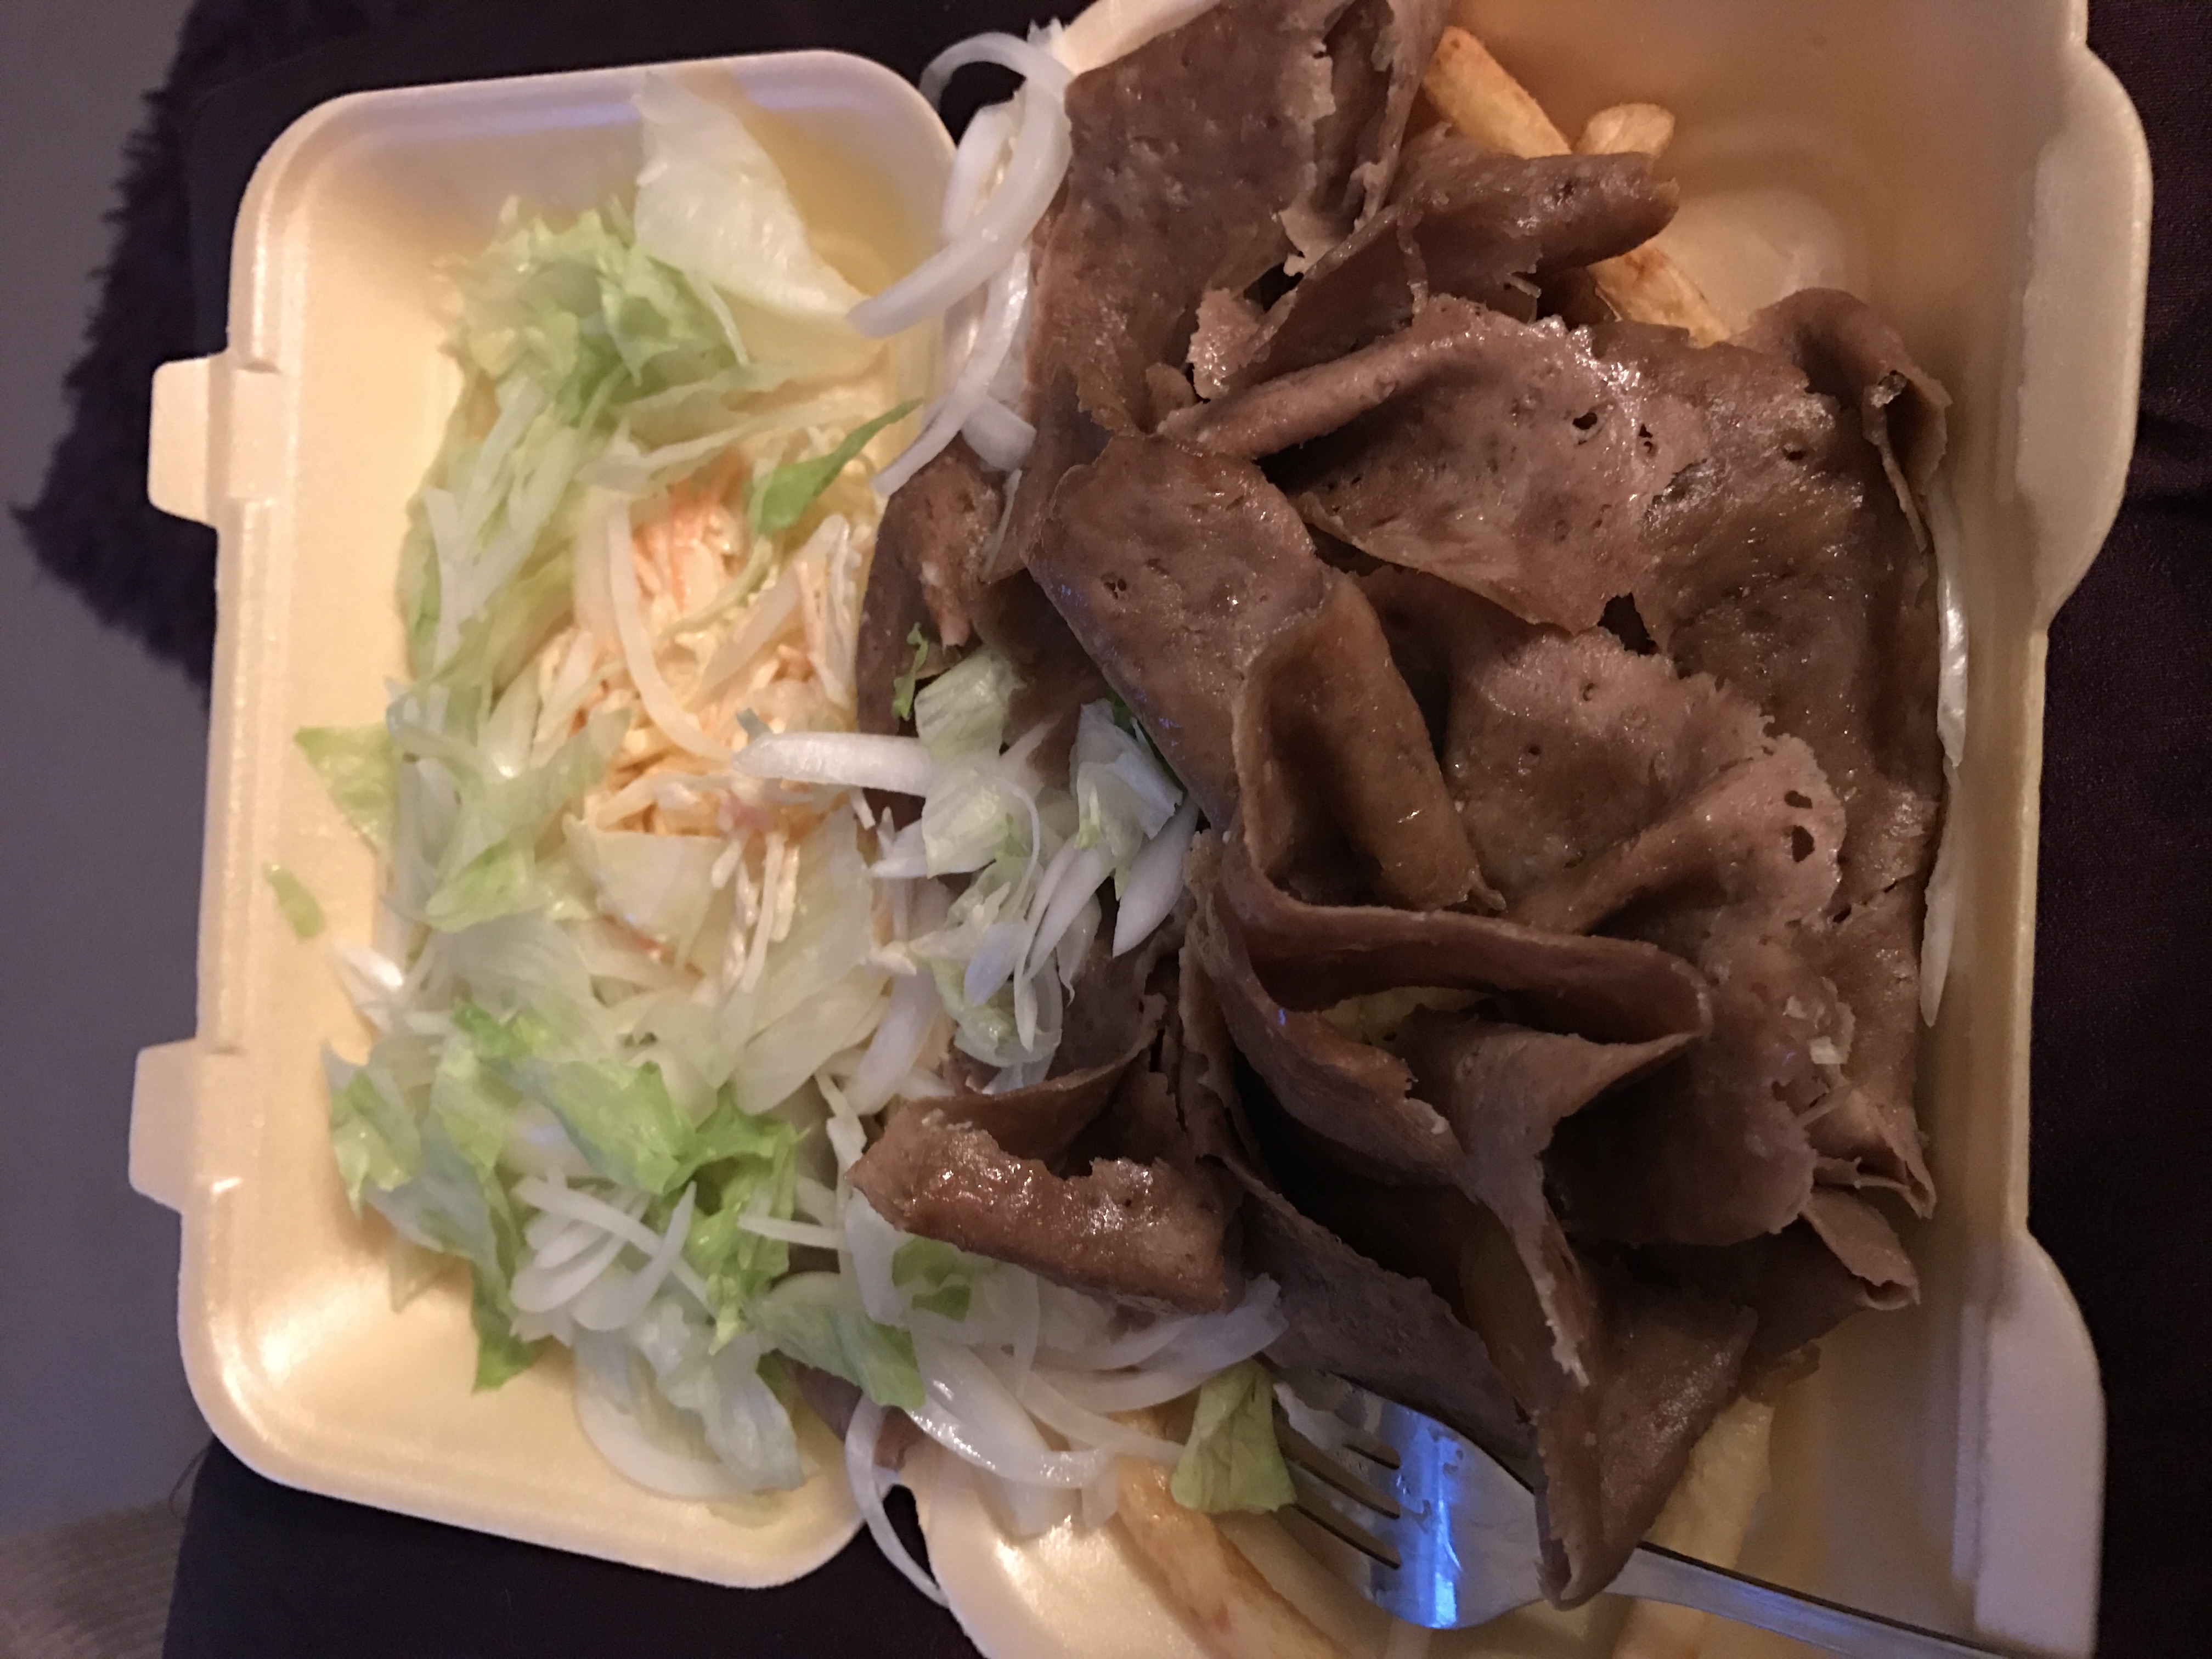 Dirty Takeaway Pictures Volume 3 - Page 92 - Food, Drink & Restaurants - PistonHeads